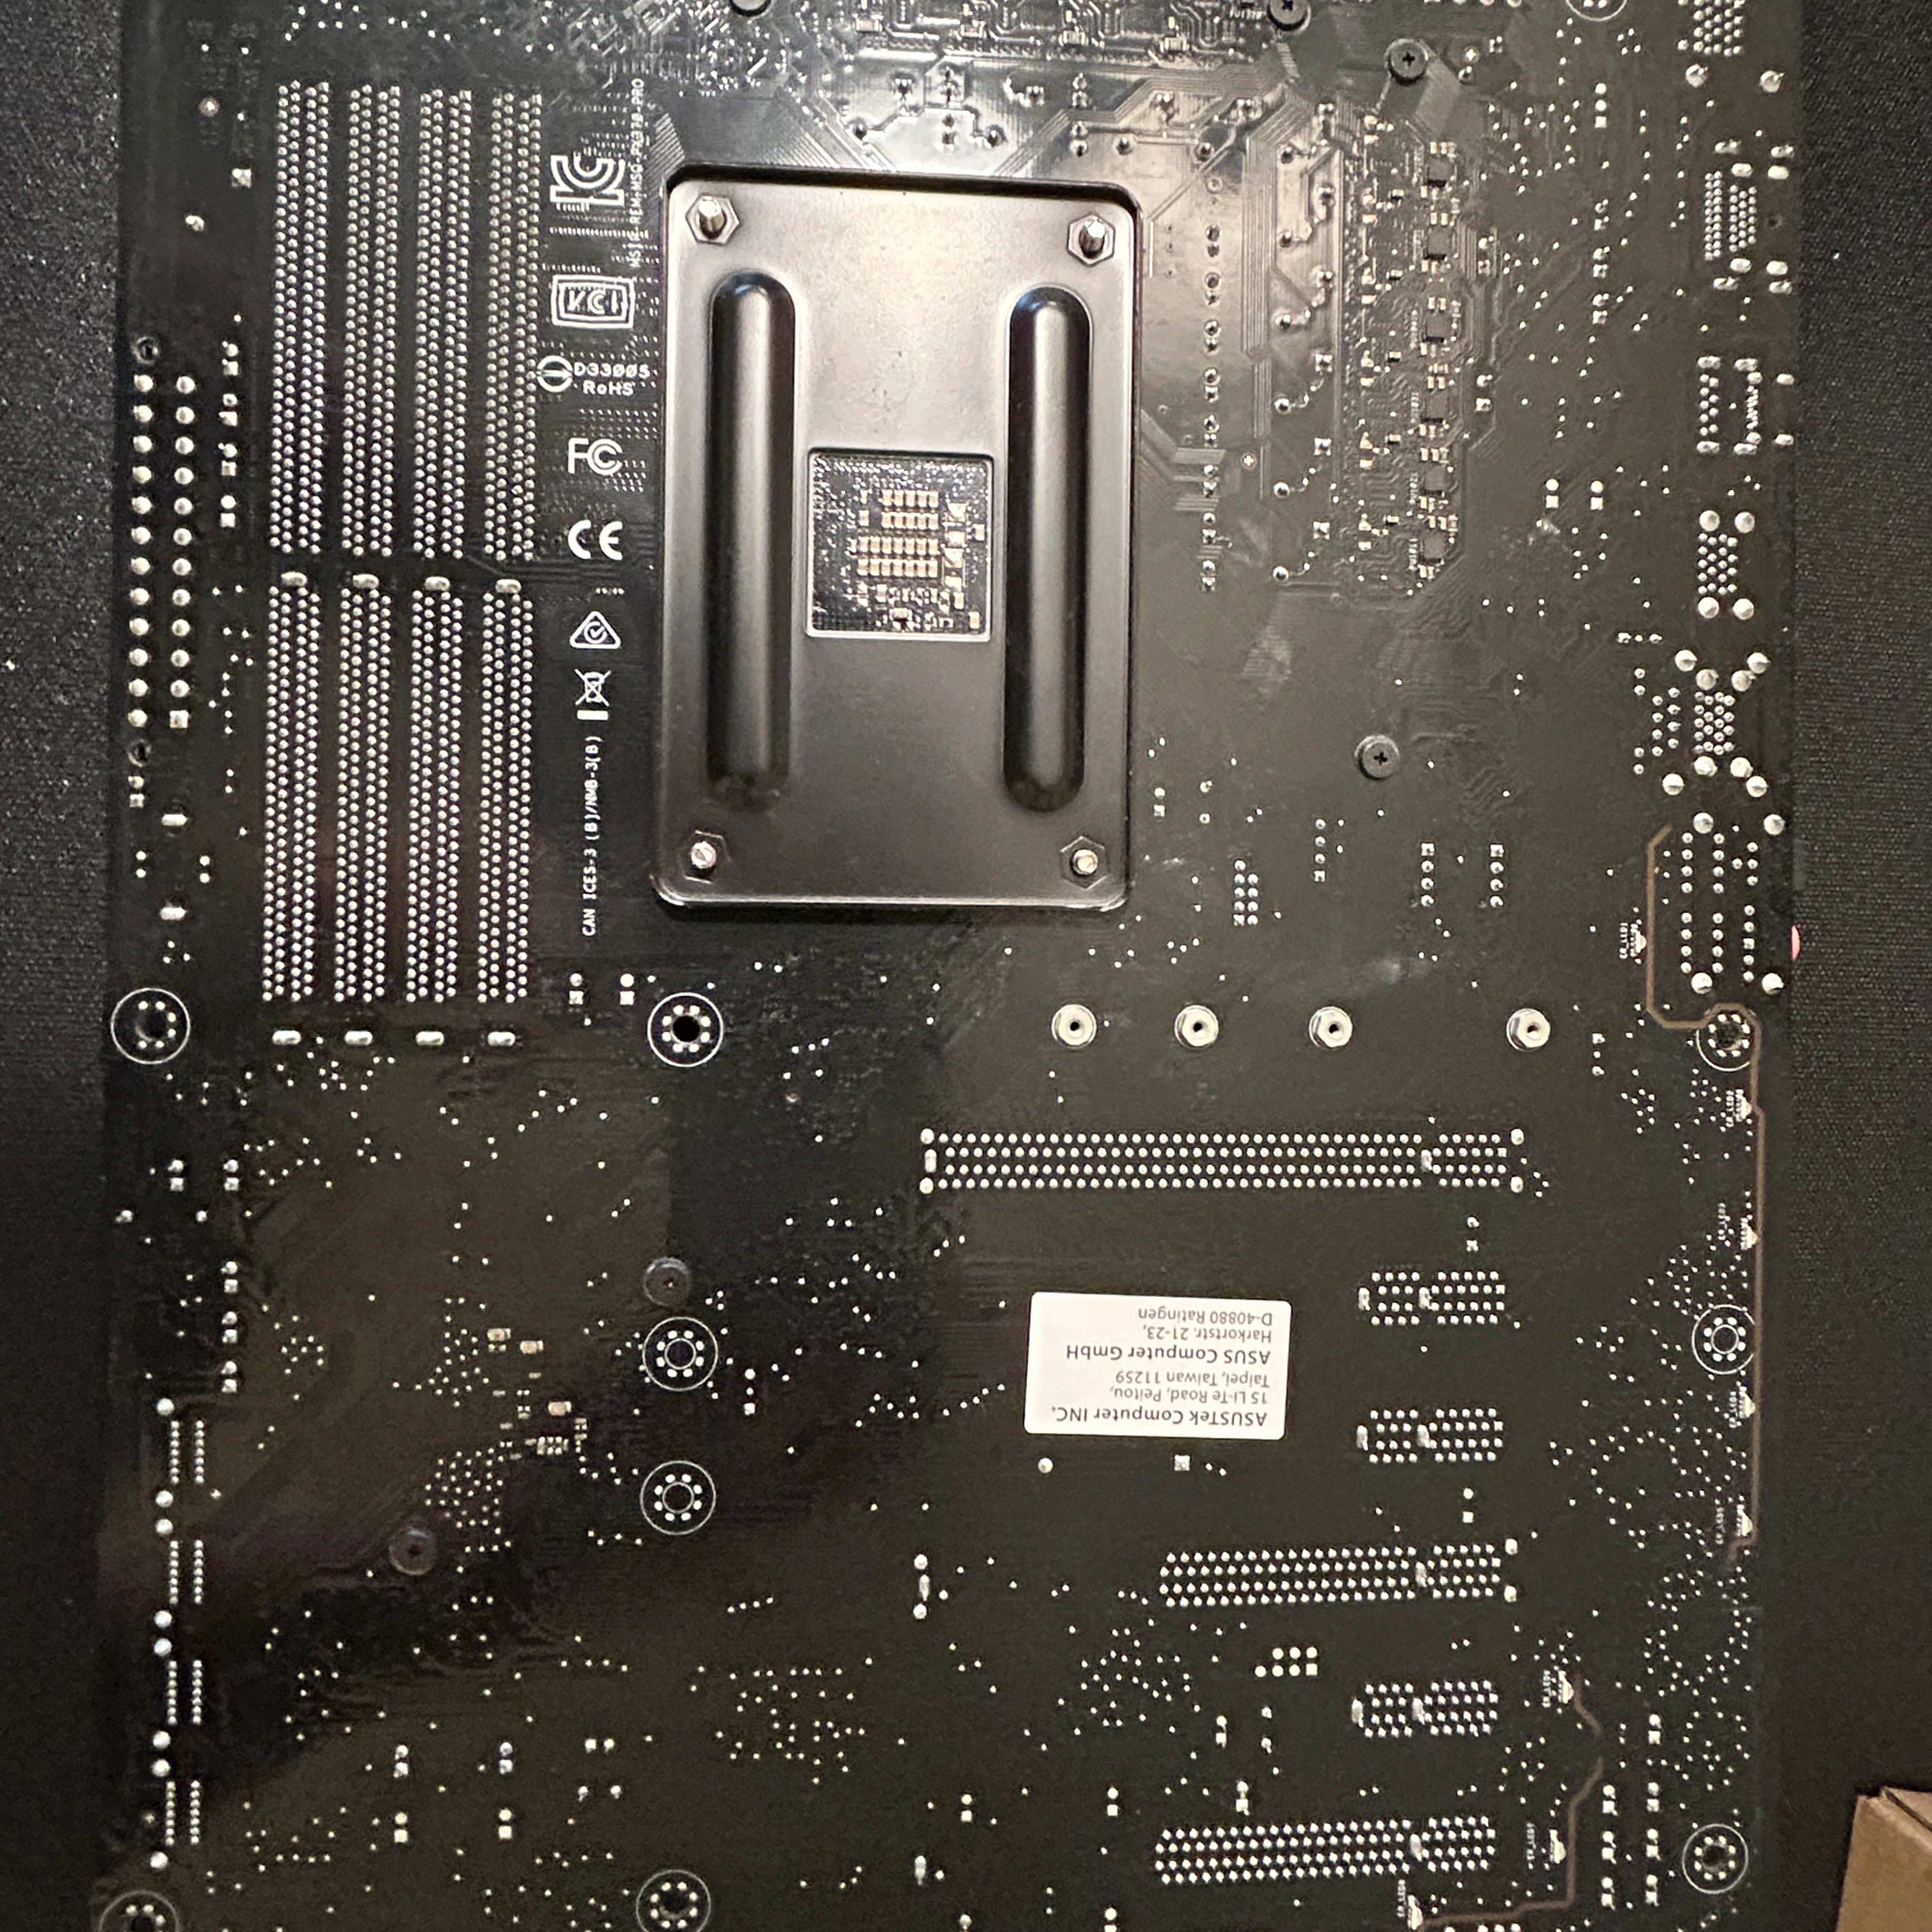 ASUS Prime X370-Pro Motherboard (AM4)